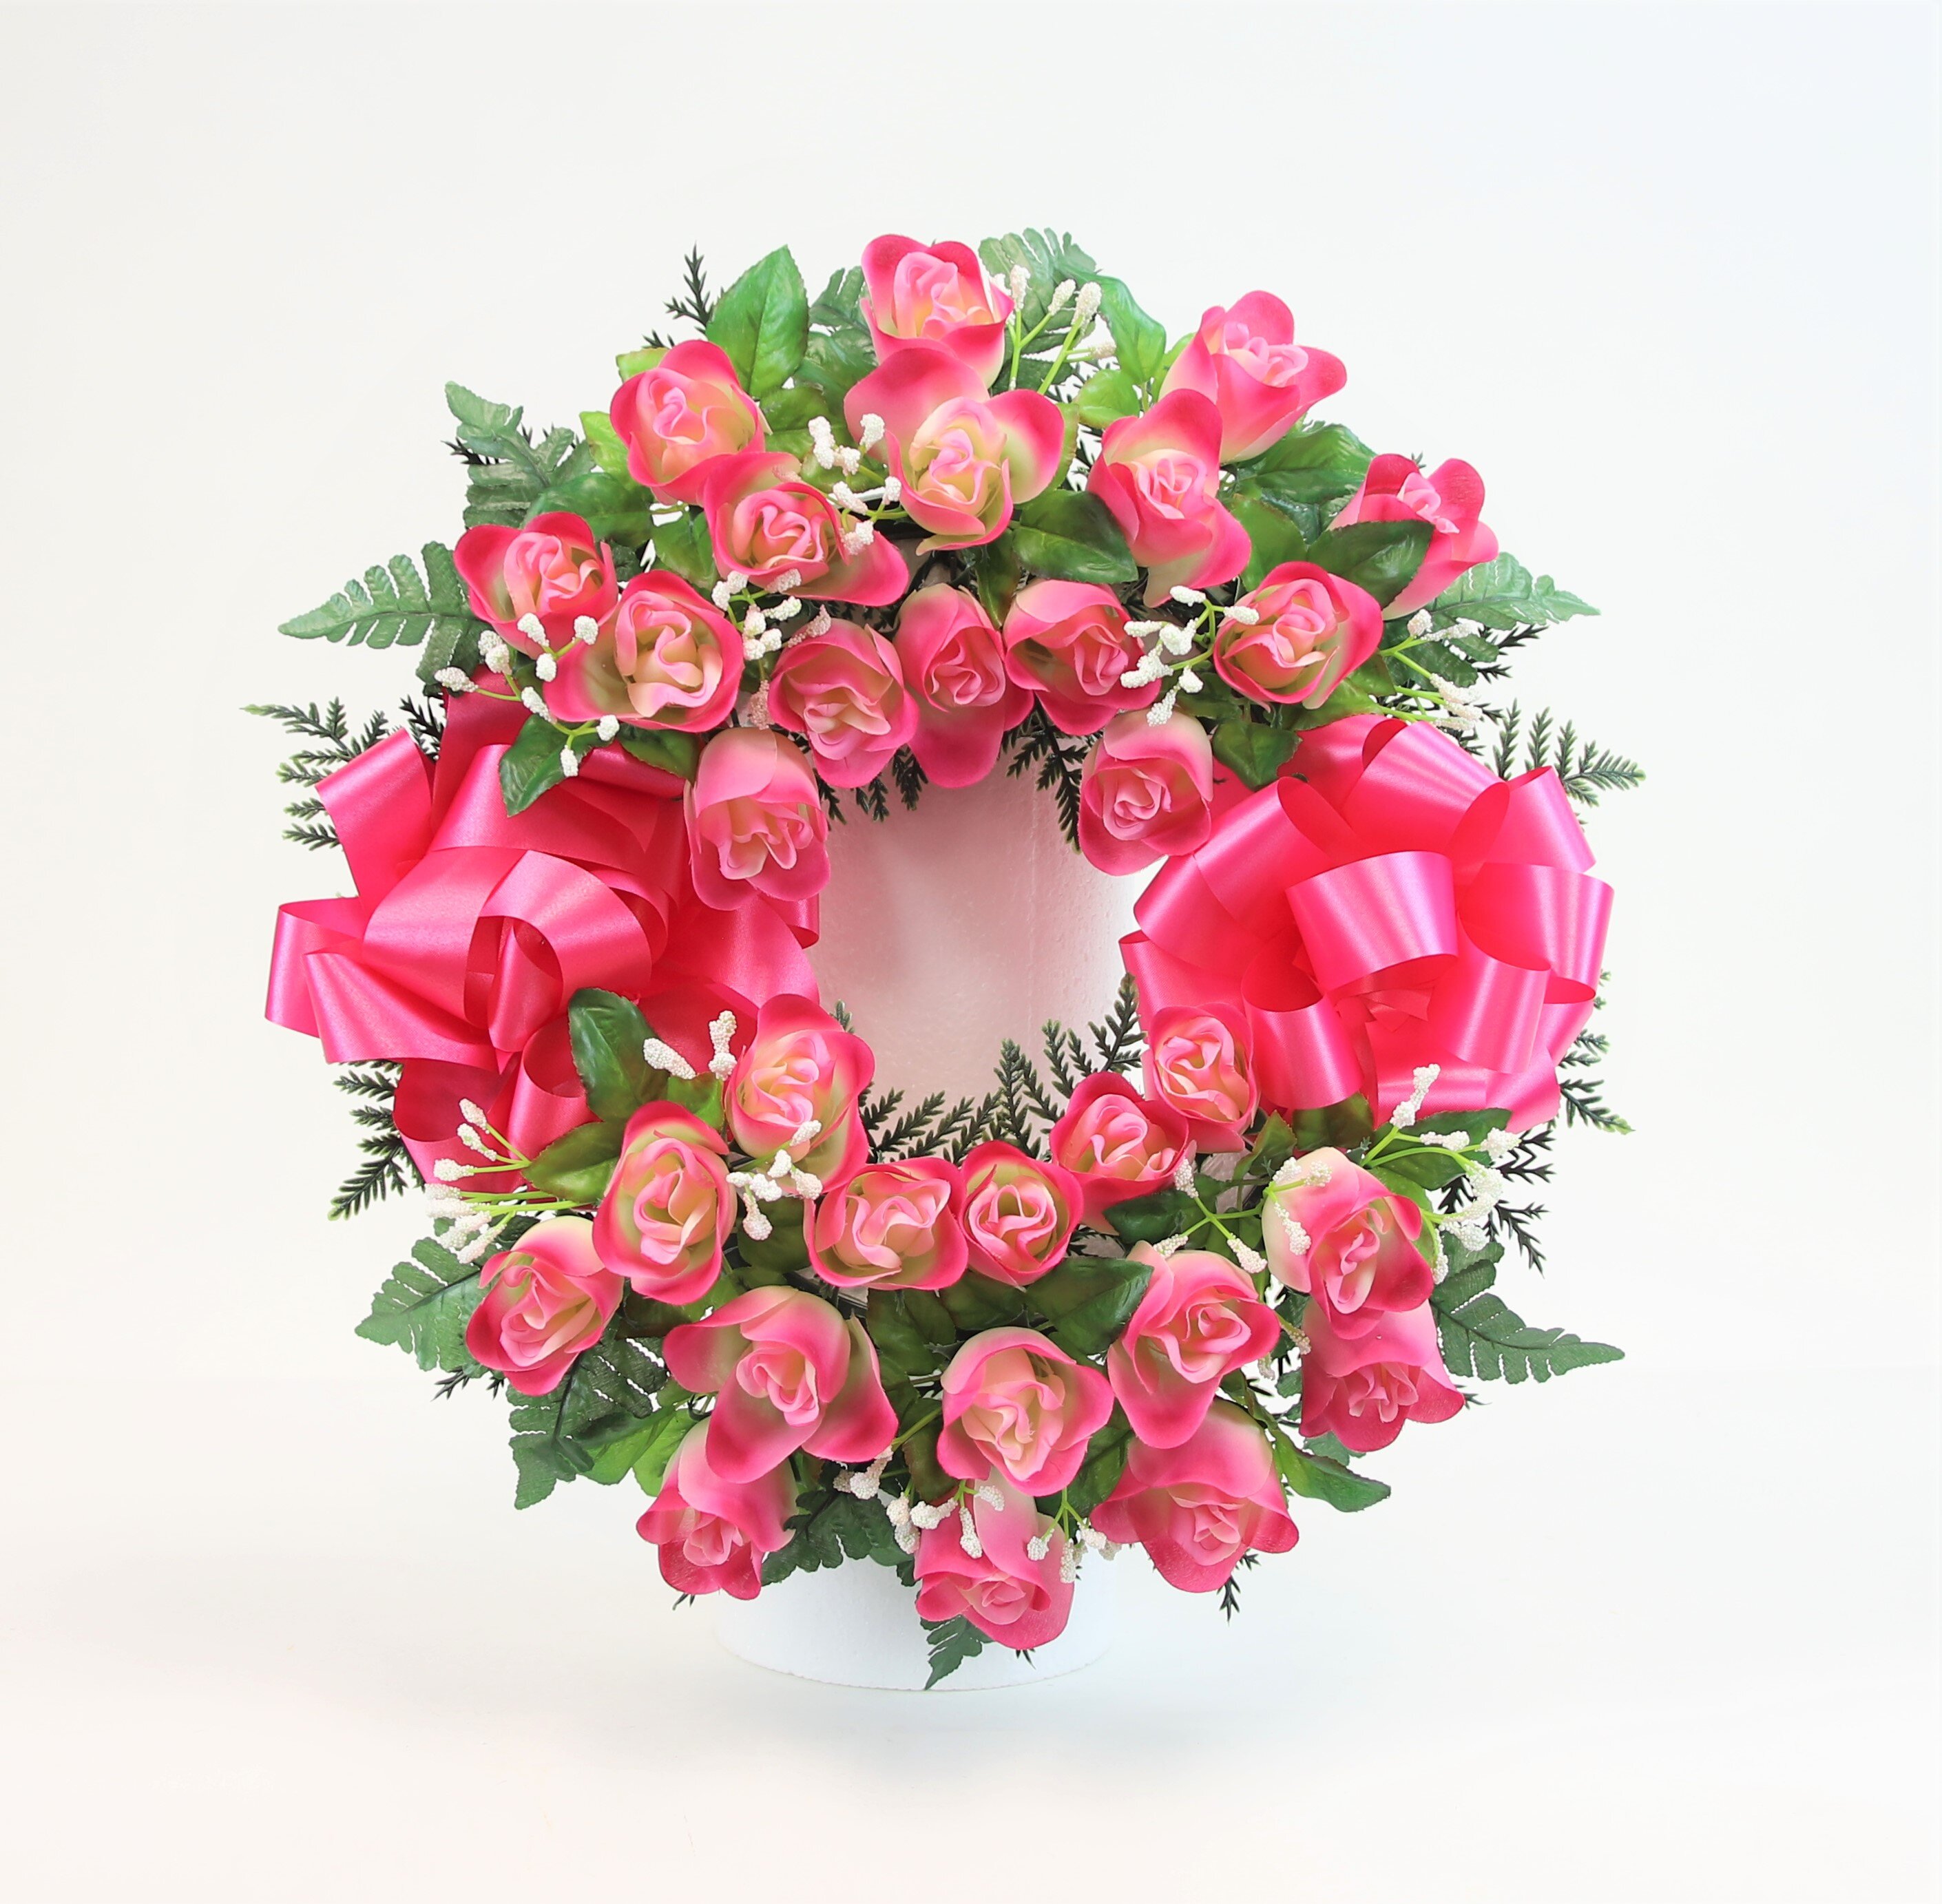 18 Funeral Wreath Stand